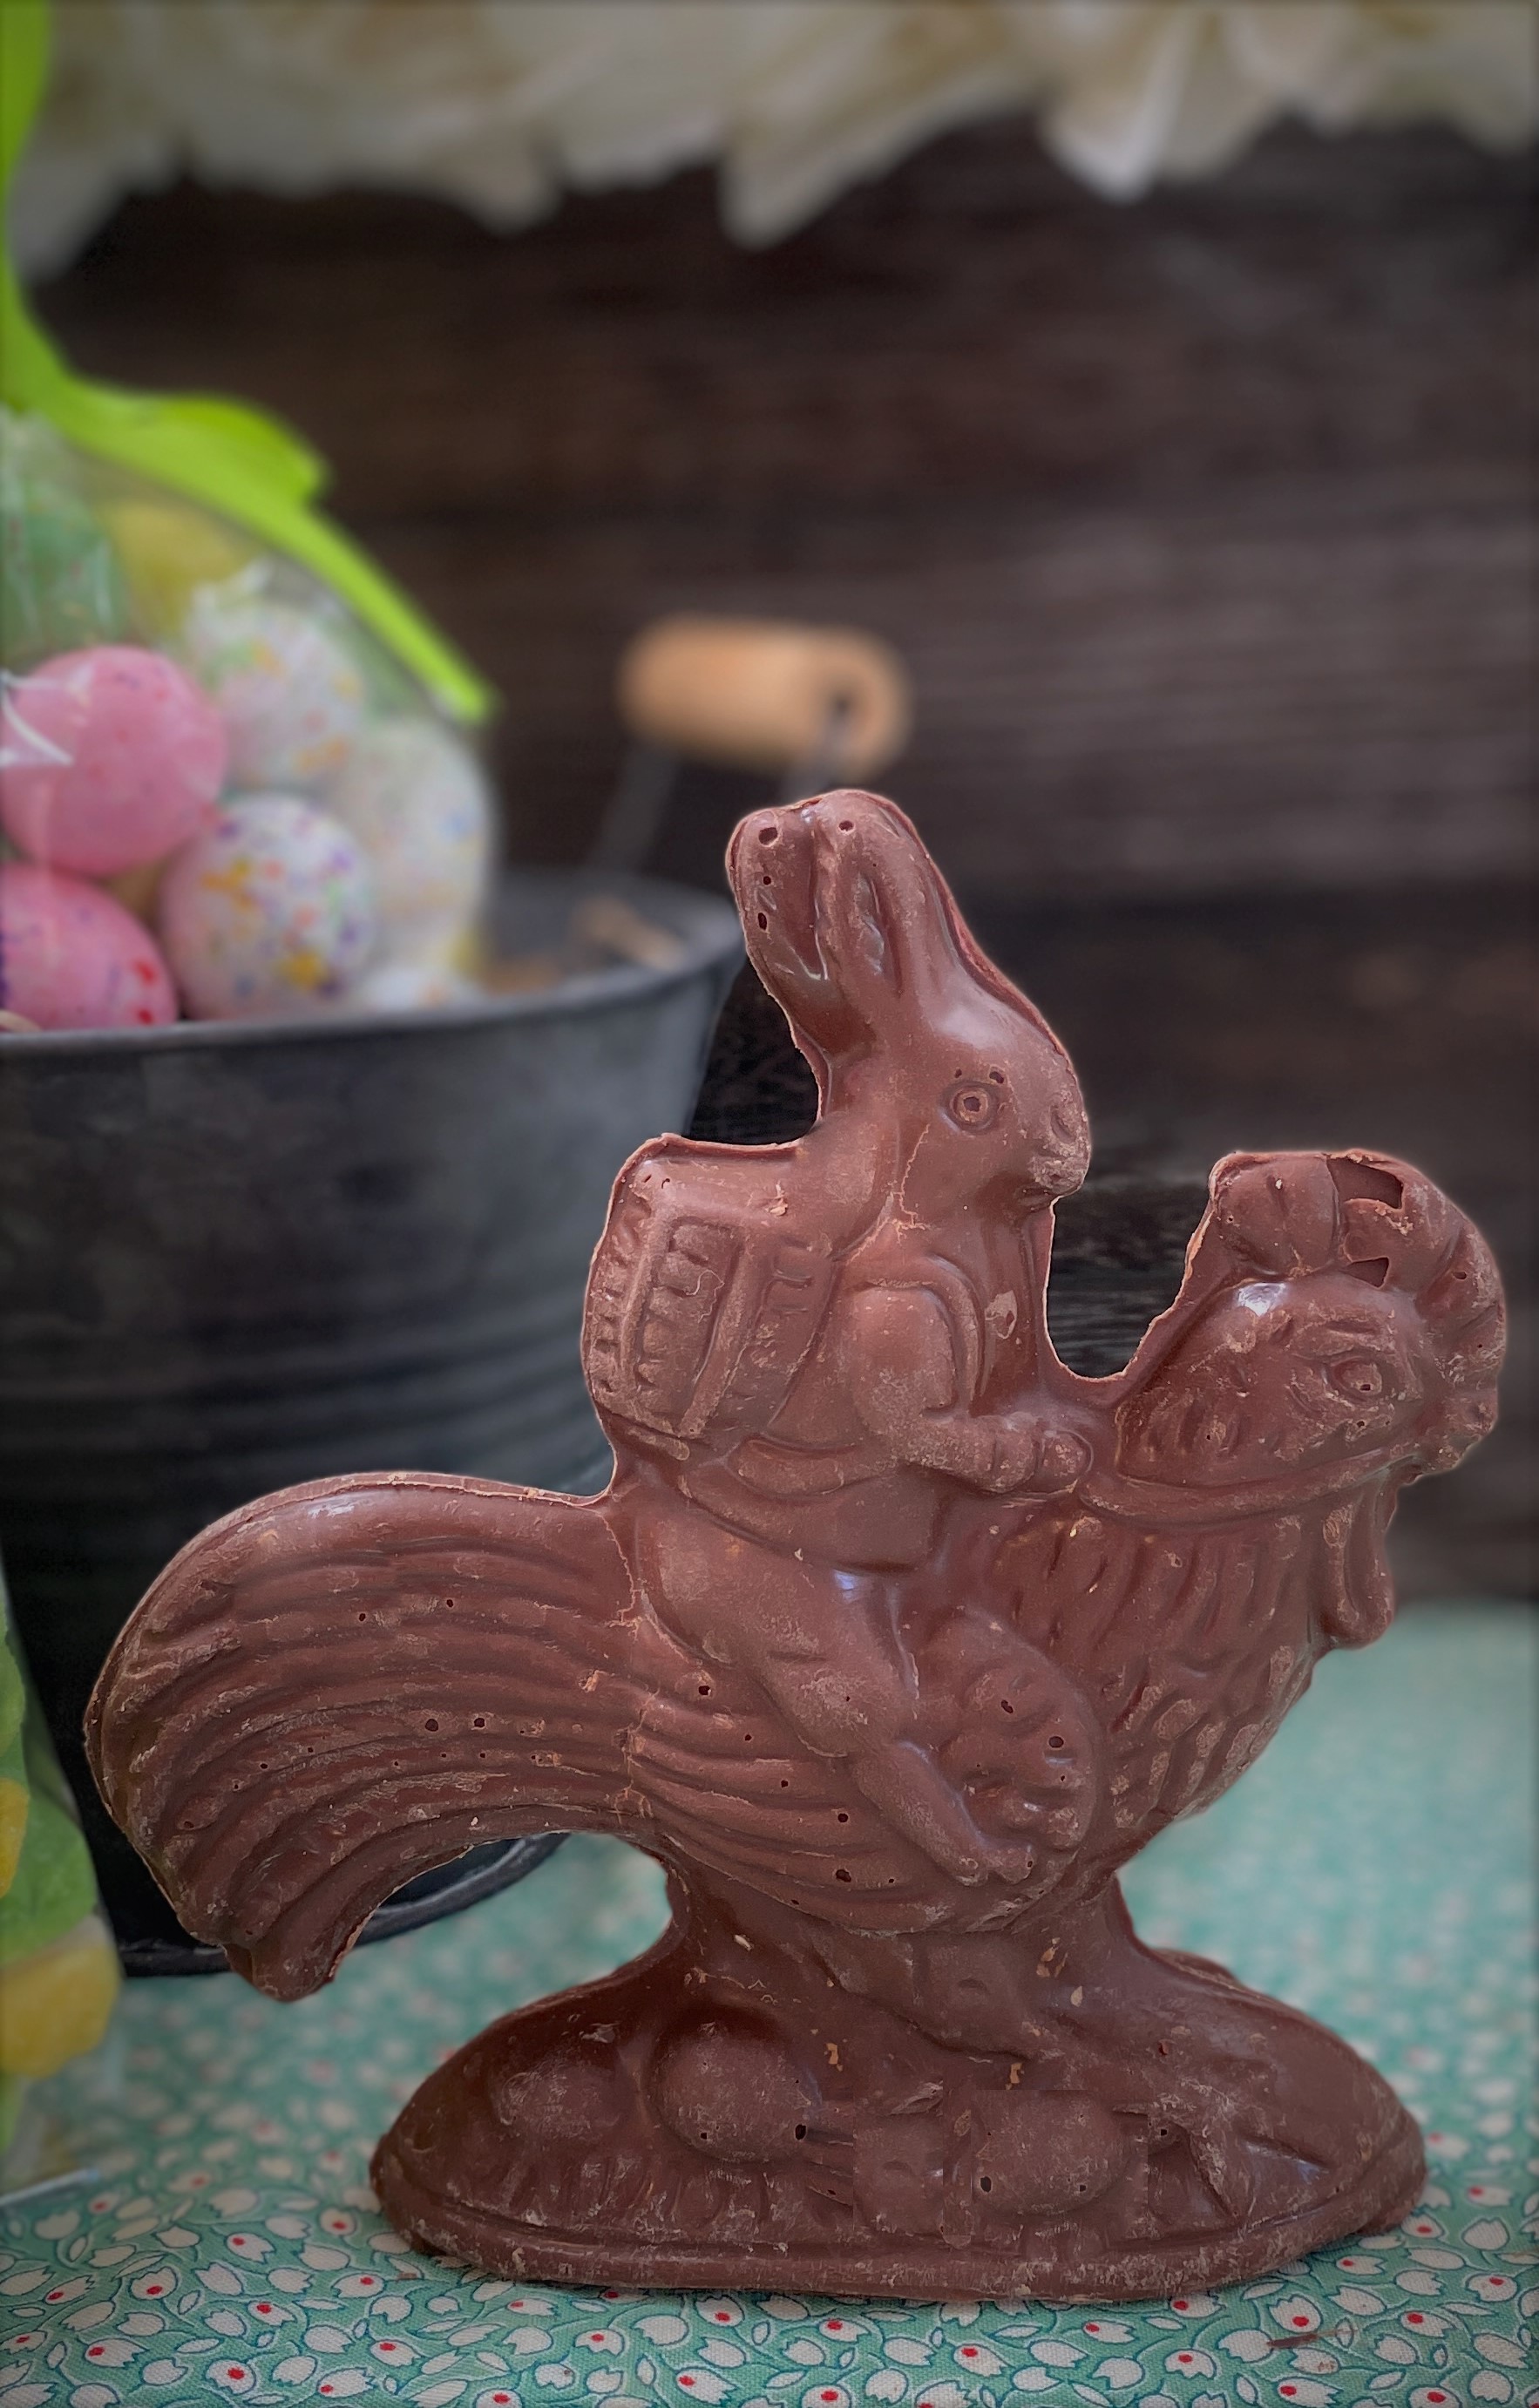 Gourmet Milk Chocolate Rabbit Riding a Rooster